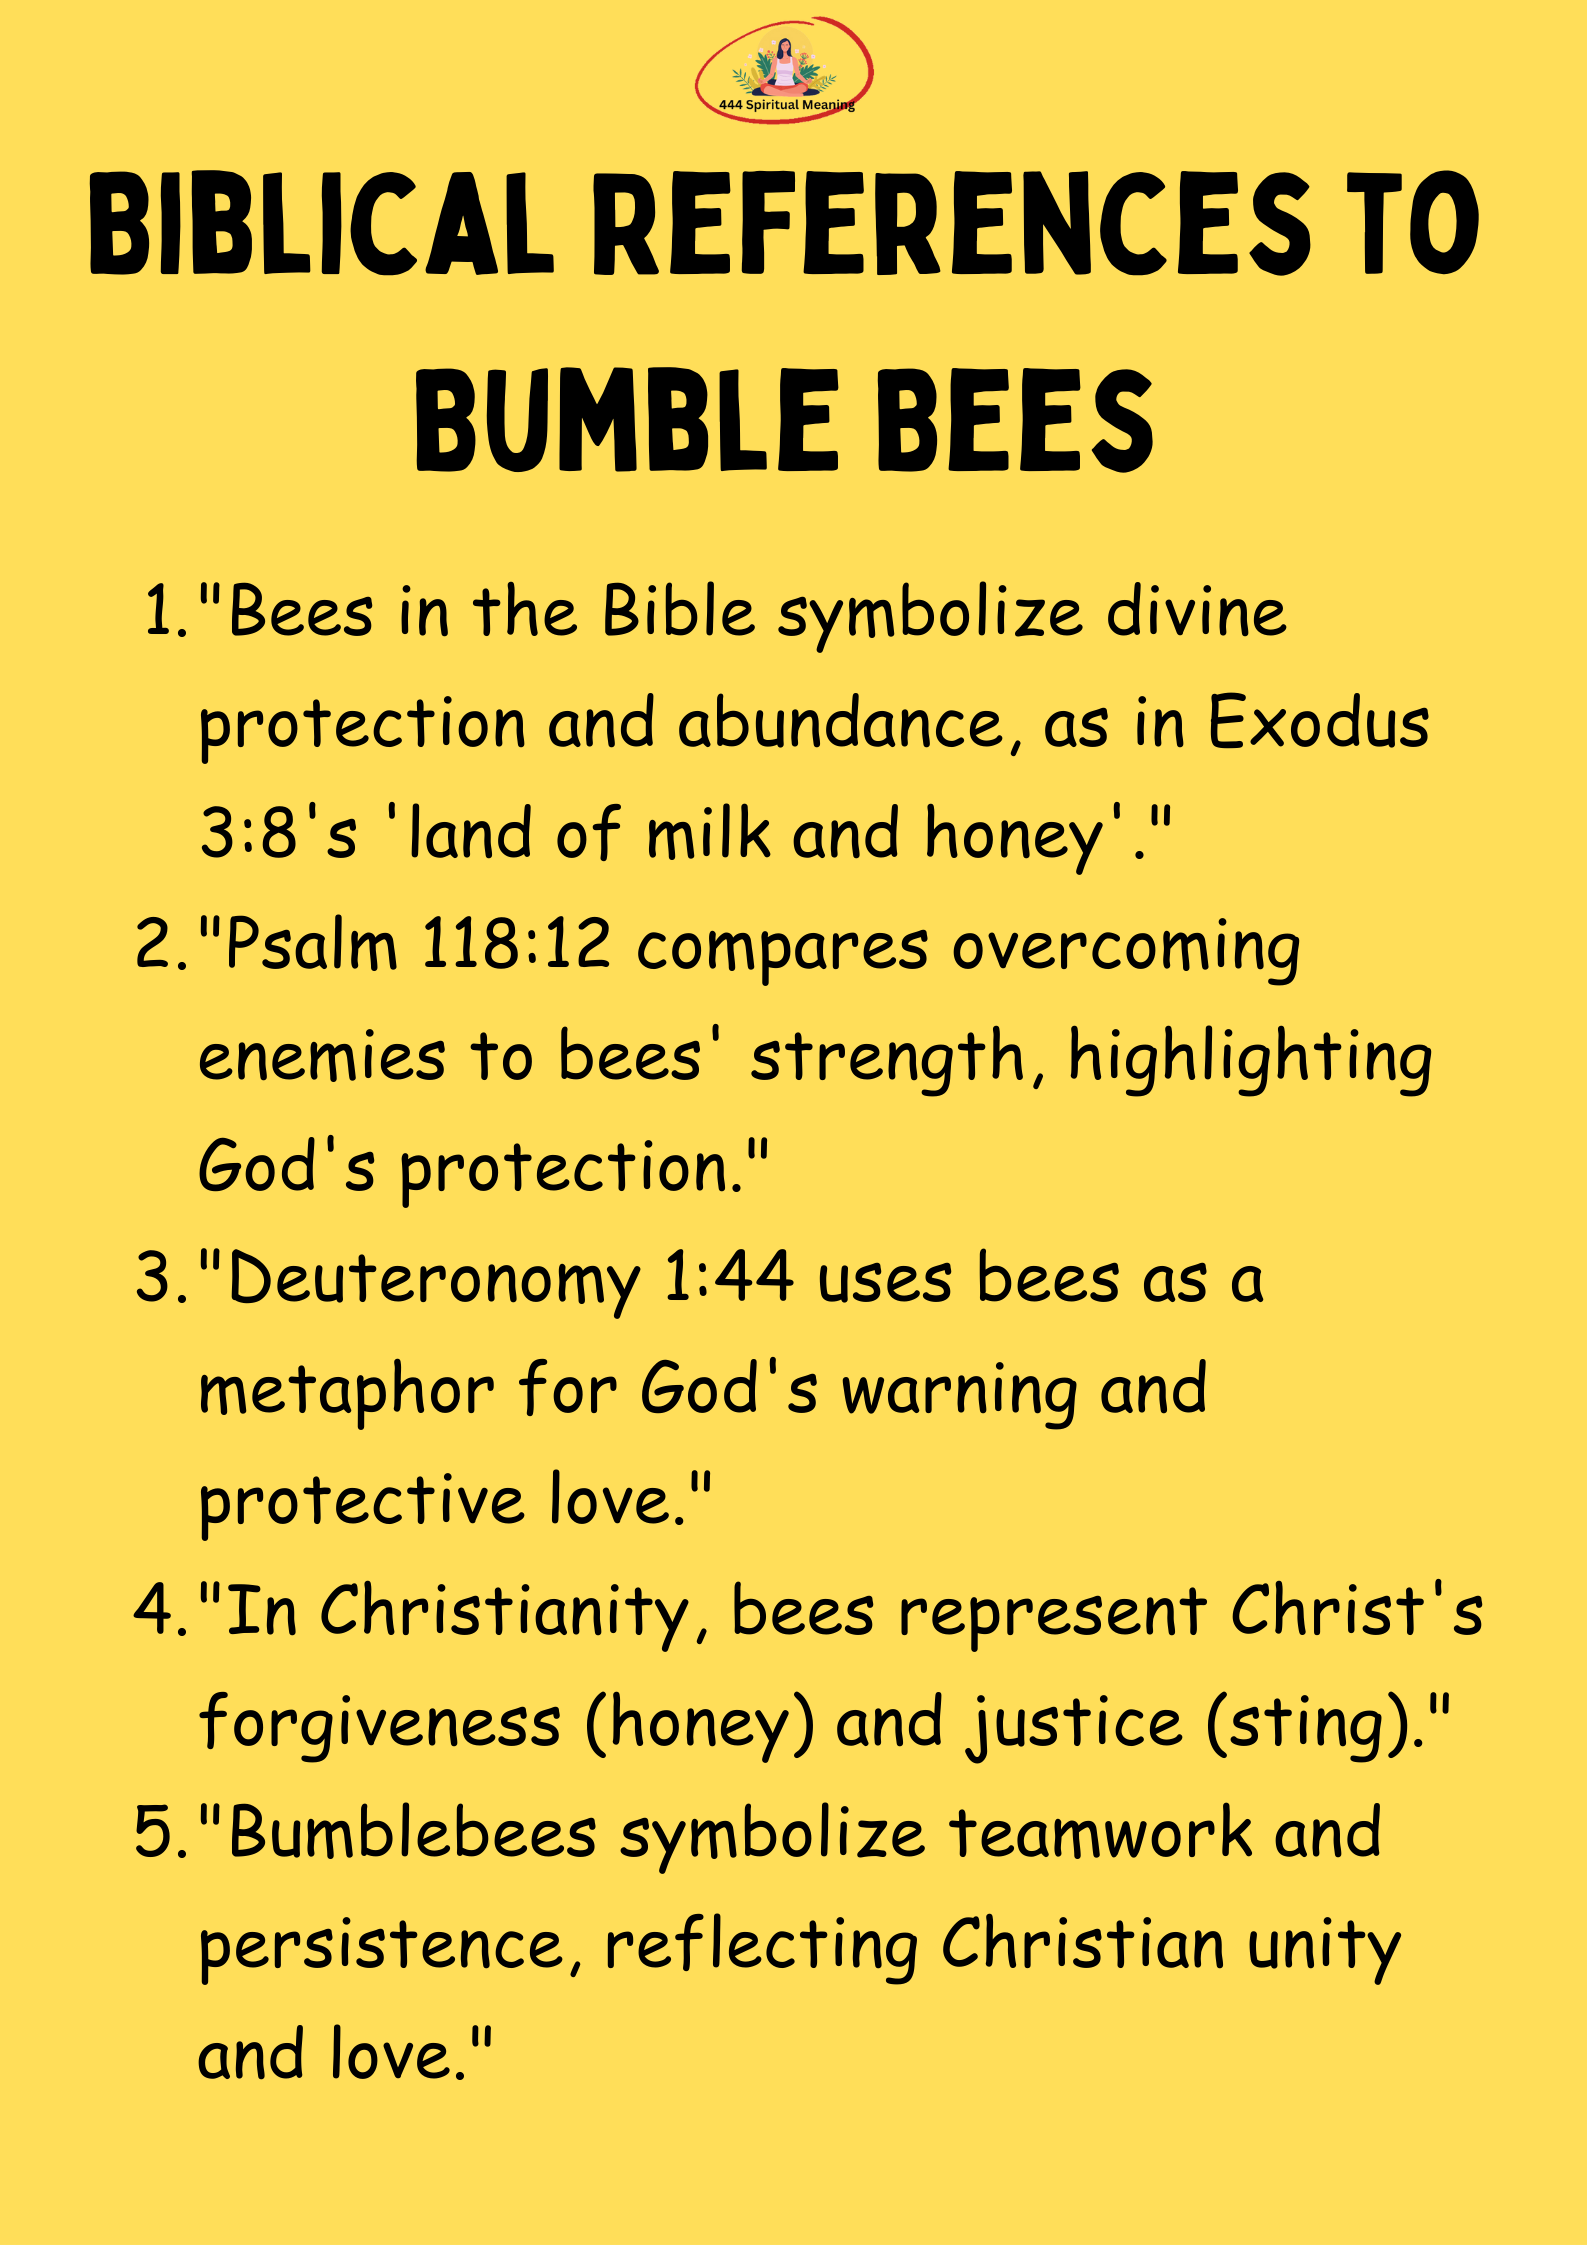 Biblical References to Bumble Bees